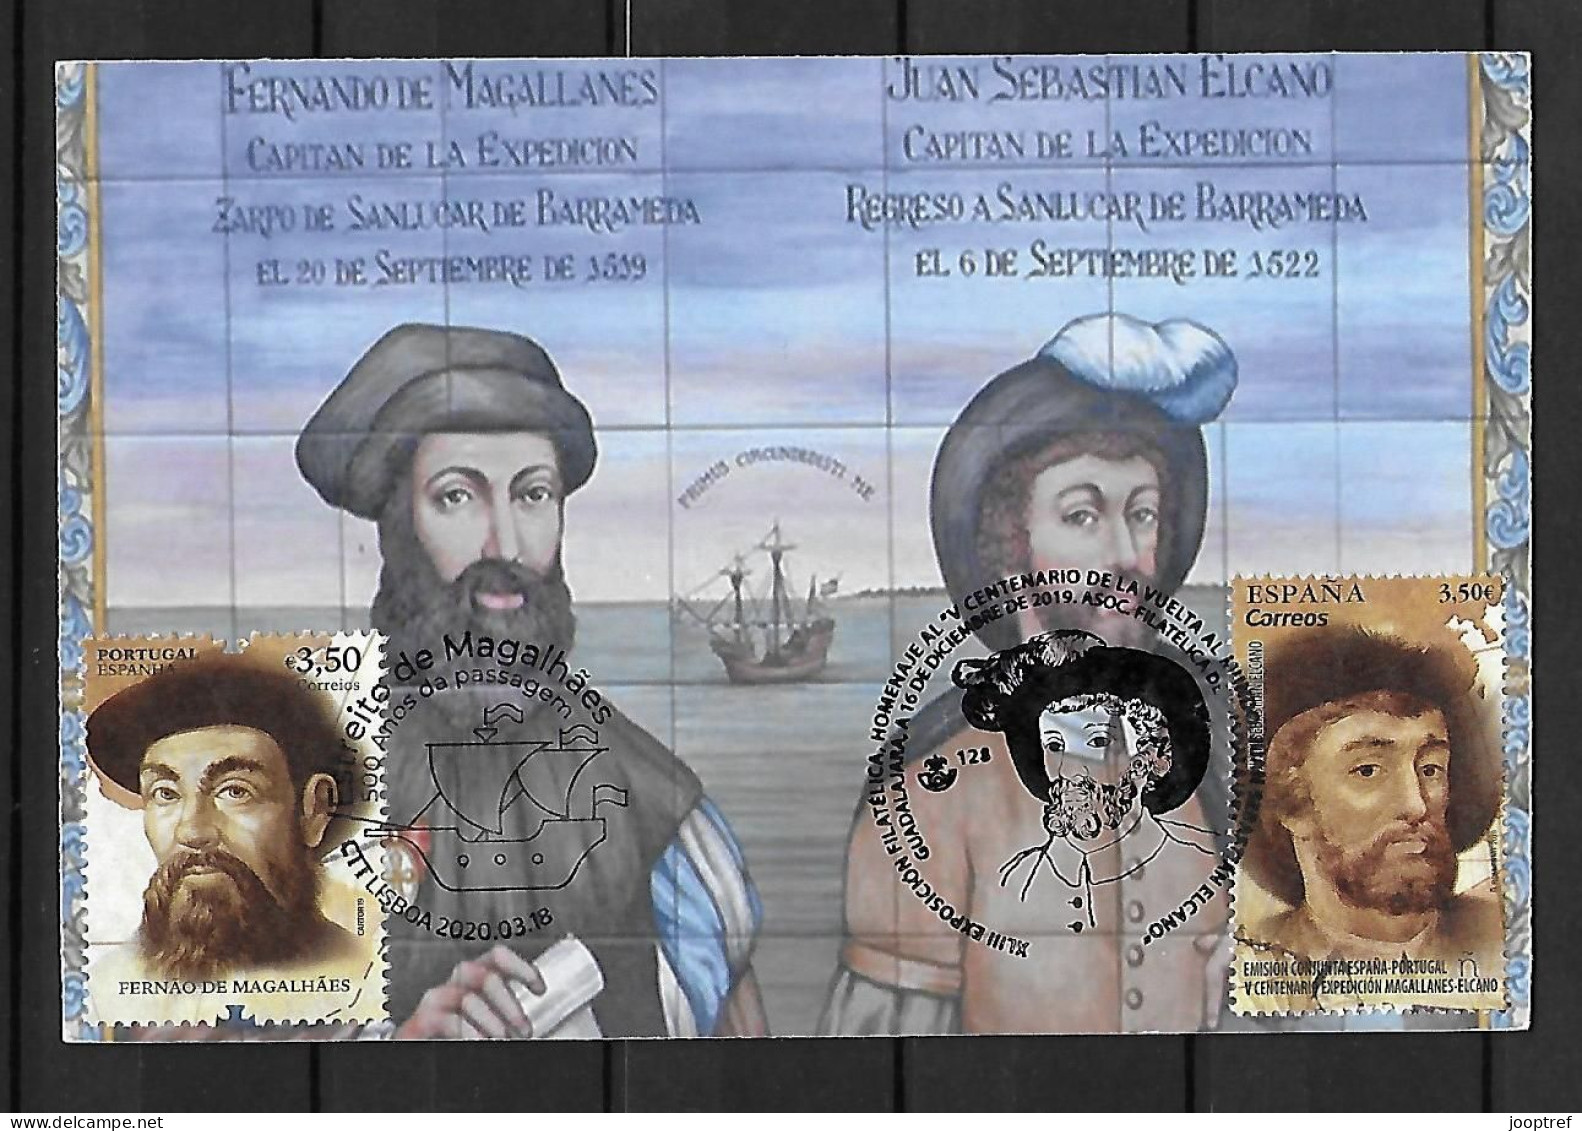 2019 Joint Portugal And Spain, MIXED FDC MAXIMUM CARD WITH BOTH STAMPS: 500 Years Magellan-Elcano Expedition - Joint Issues